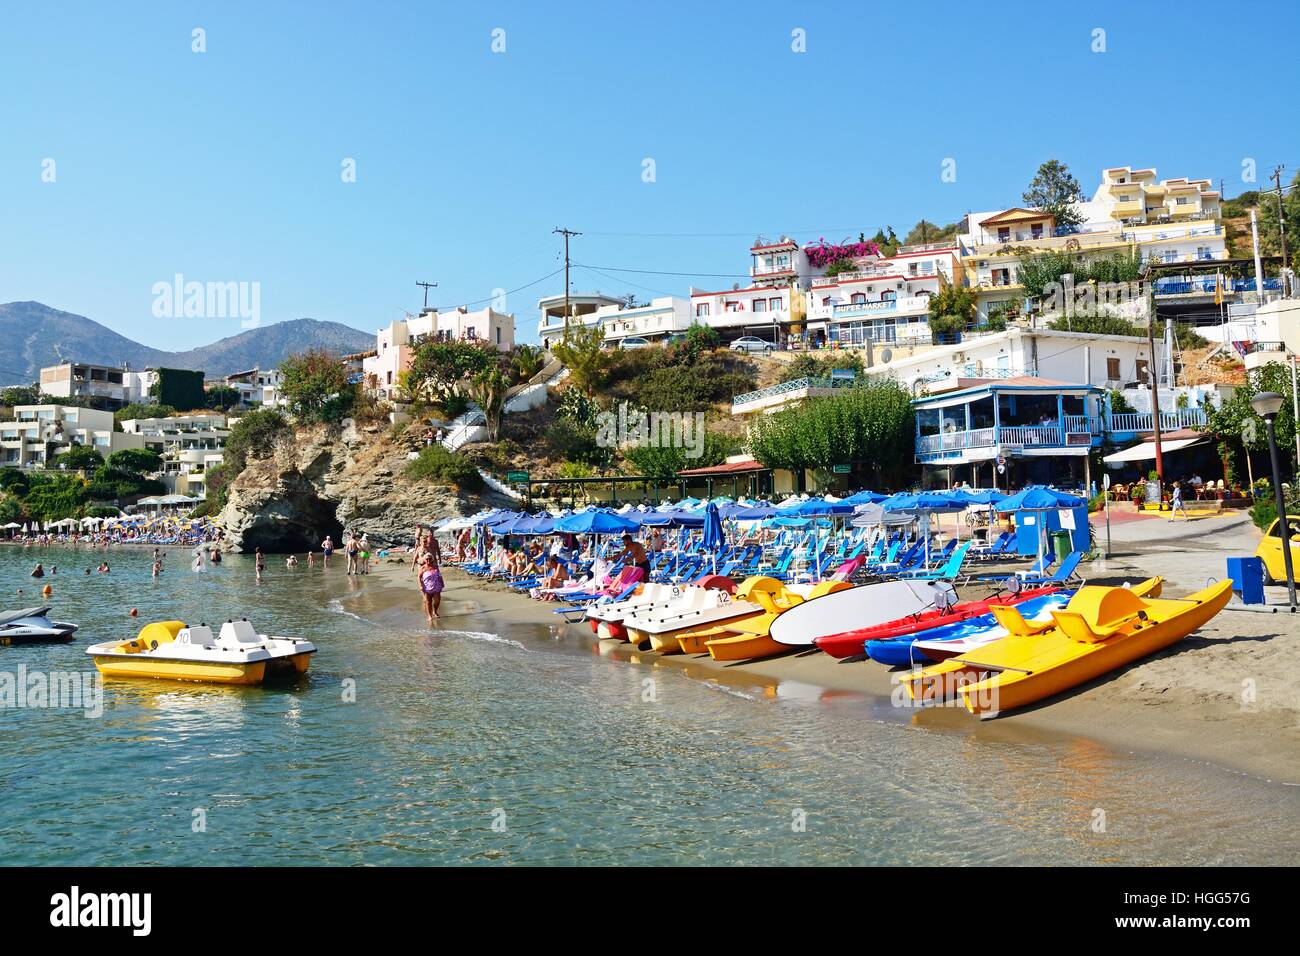 Tourists relaxing on the beach with town buildings to the rear, Bali, Crete, Greece, Europe. Stock Photo